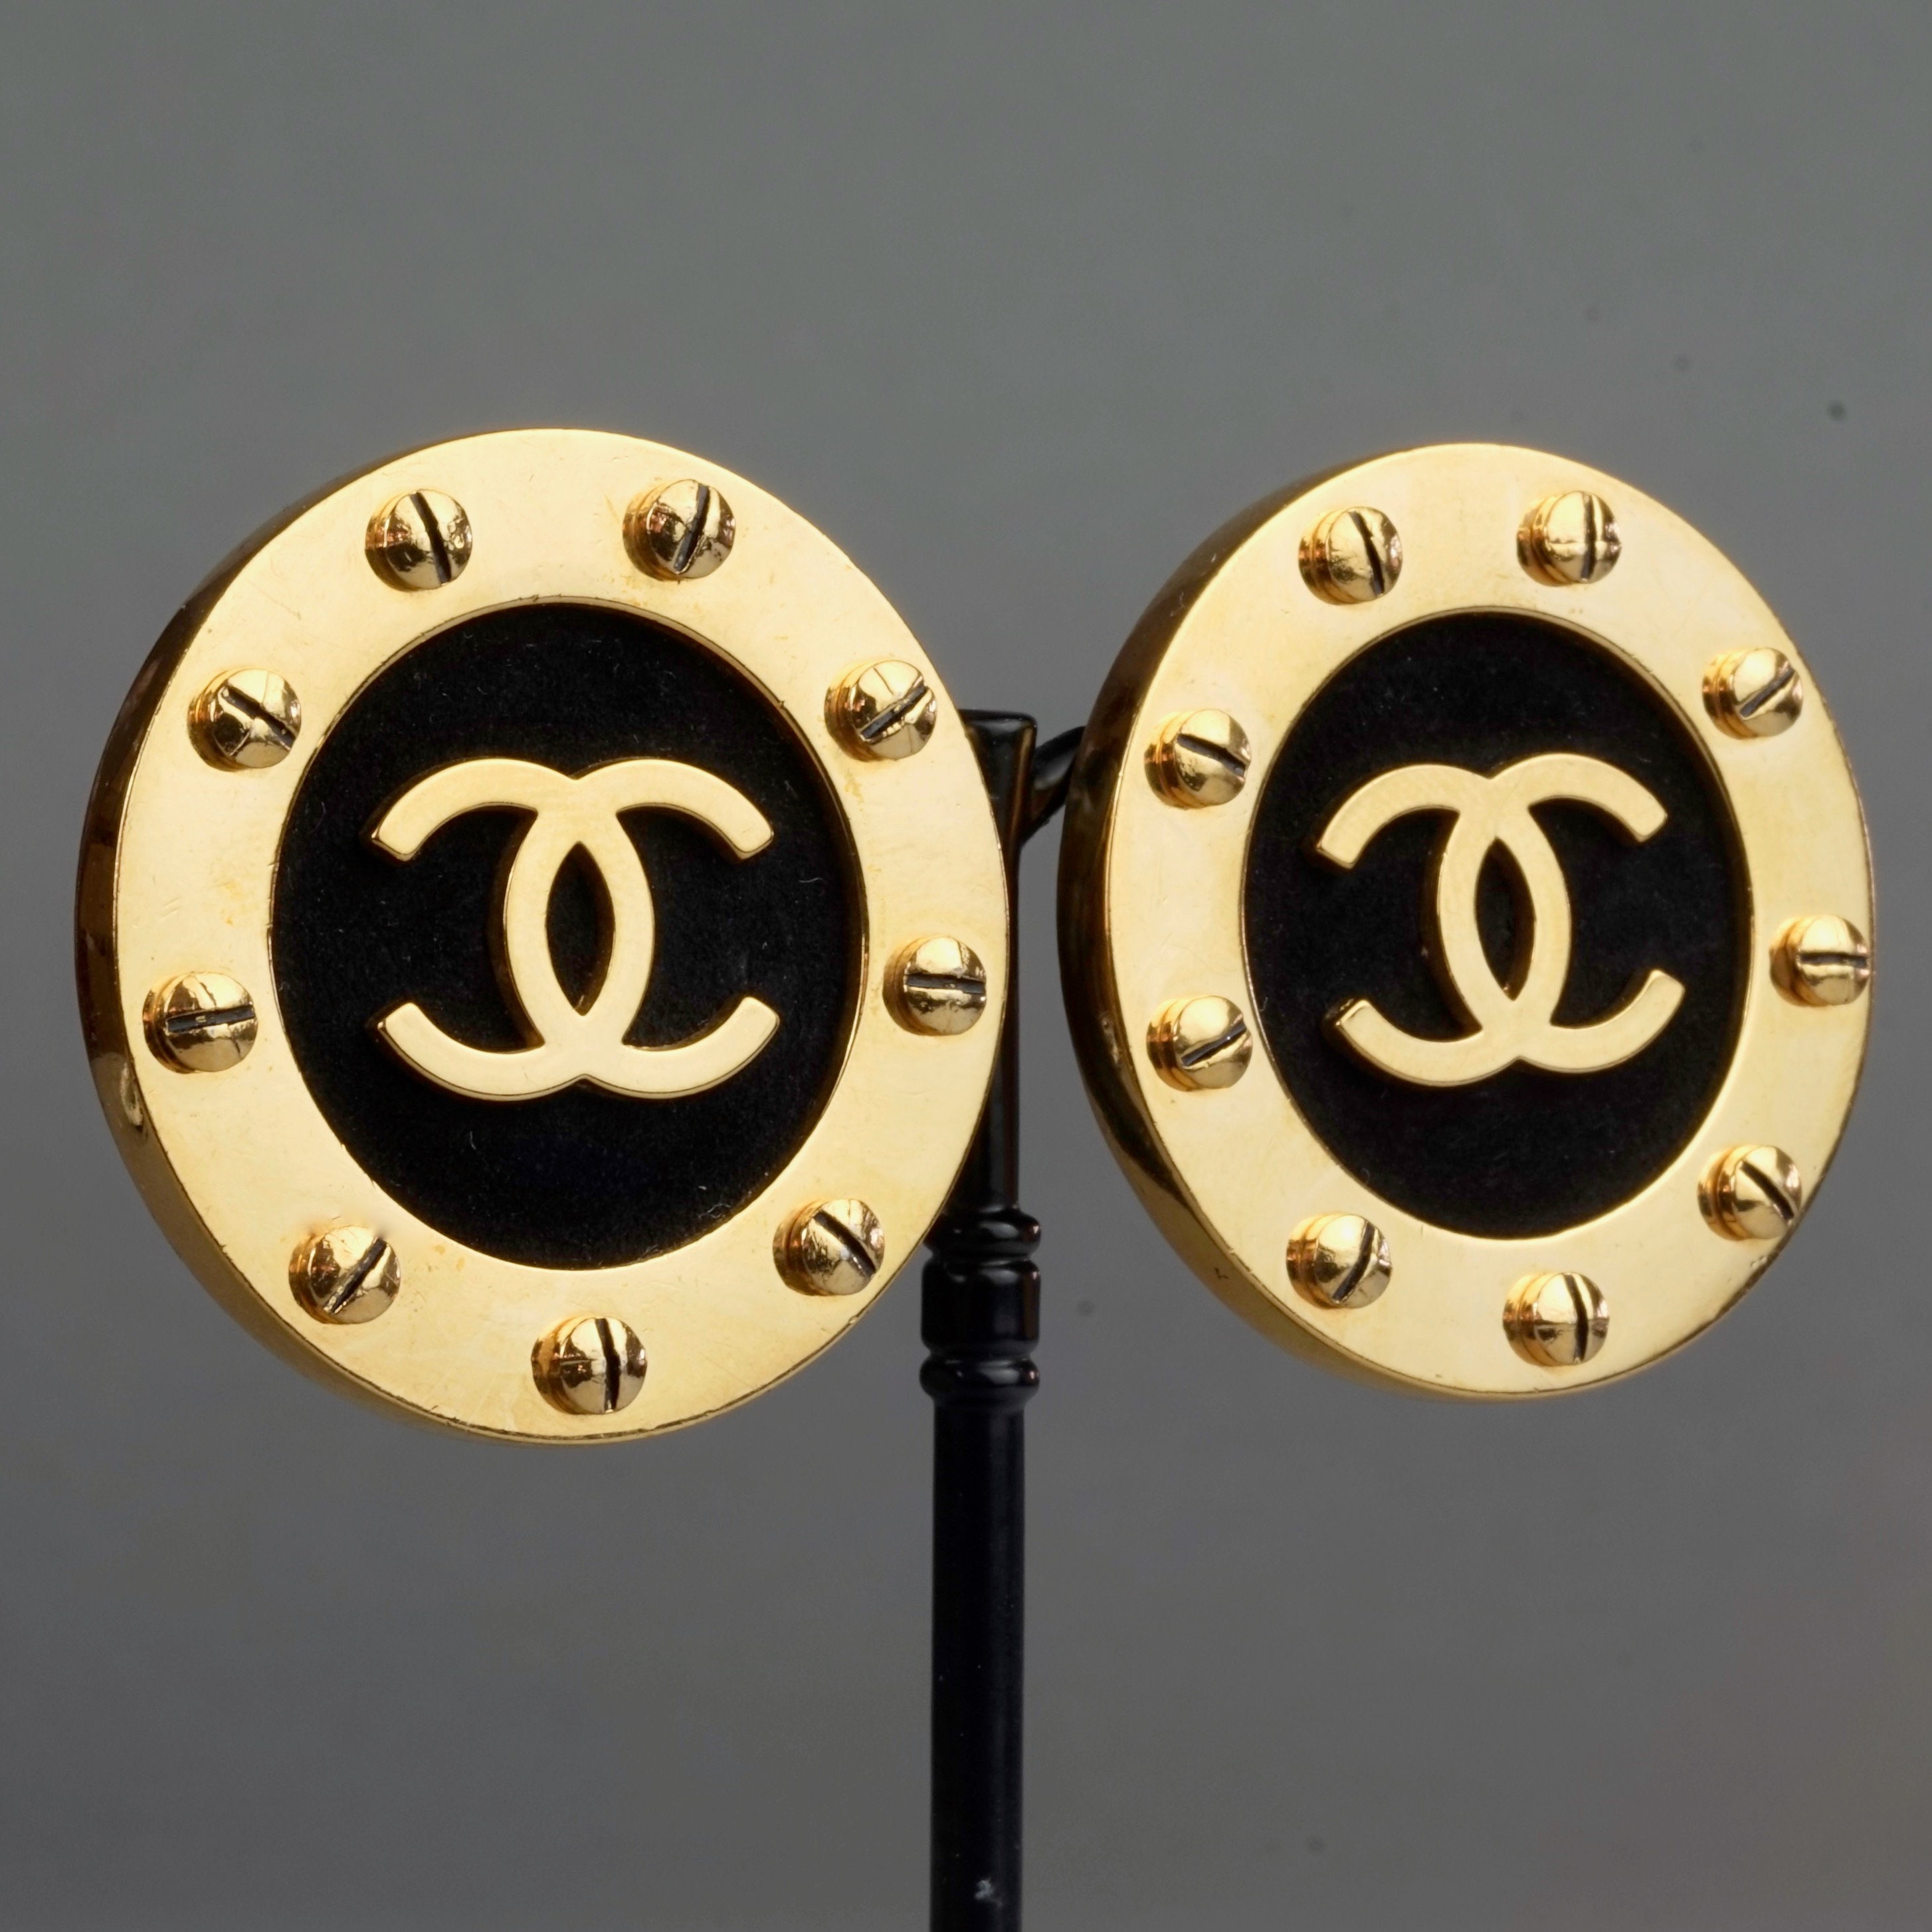 Chanel Vintage Collection 29 Large Oversized Gold and Black CC Logo Statement Giant Stud Earrings